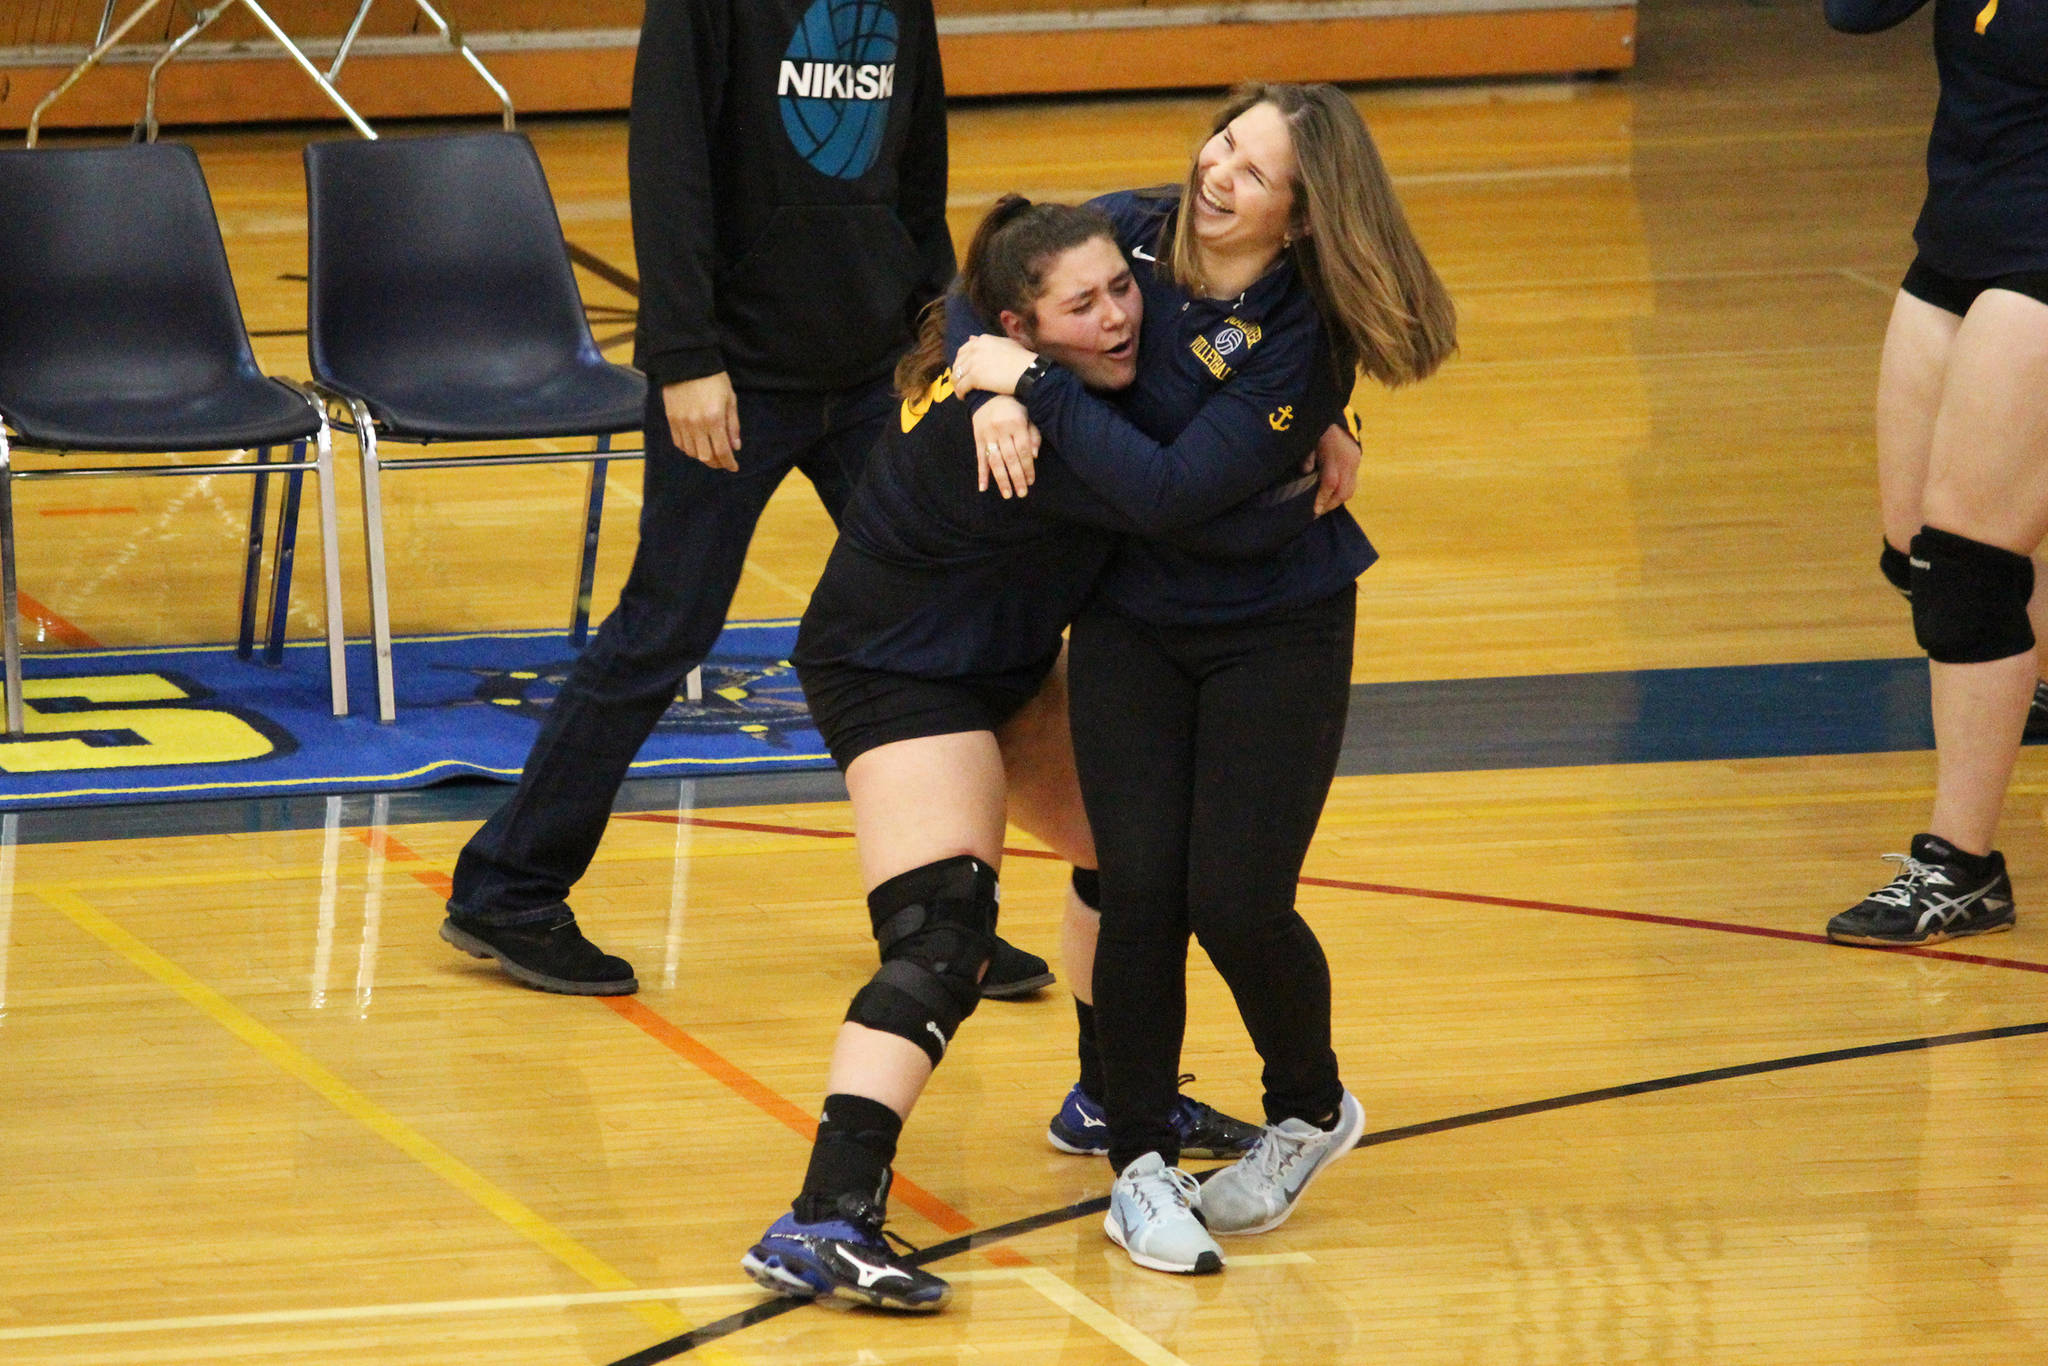 Homer senior Brianna Hetrick and volleyball coach Sara Pennington celebrate just after winning their last home game of the season against Nikiski Middle-High School on Saturday, Oct. 13, 2018 in Homer, Alaska. The Mariners haven’t beaten Nikiski in a regular game since 2014. (Photo by Megan Pacer/Homer News)